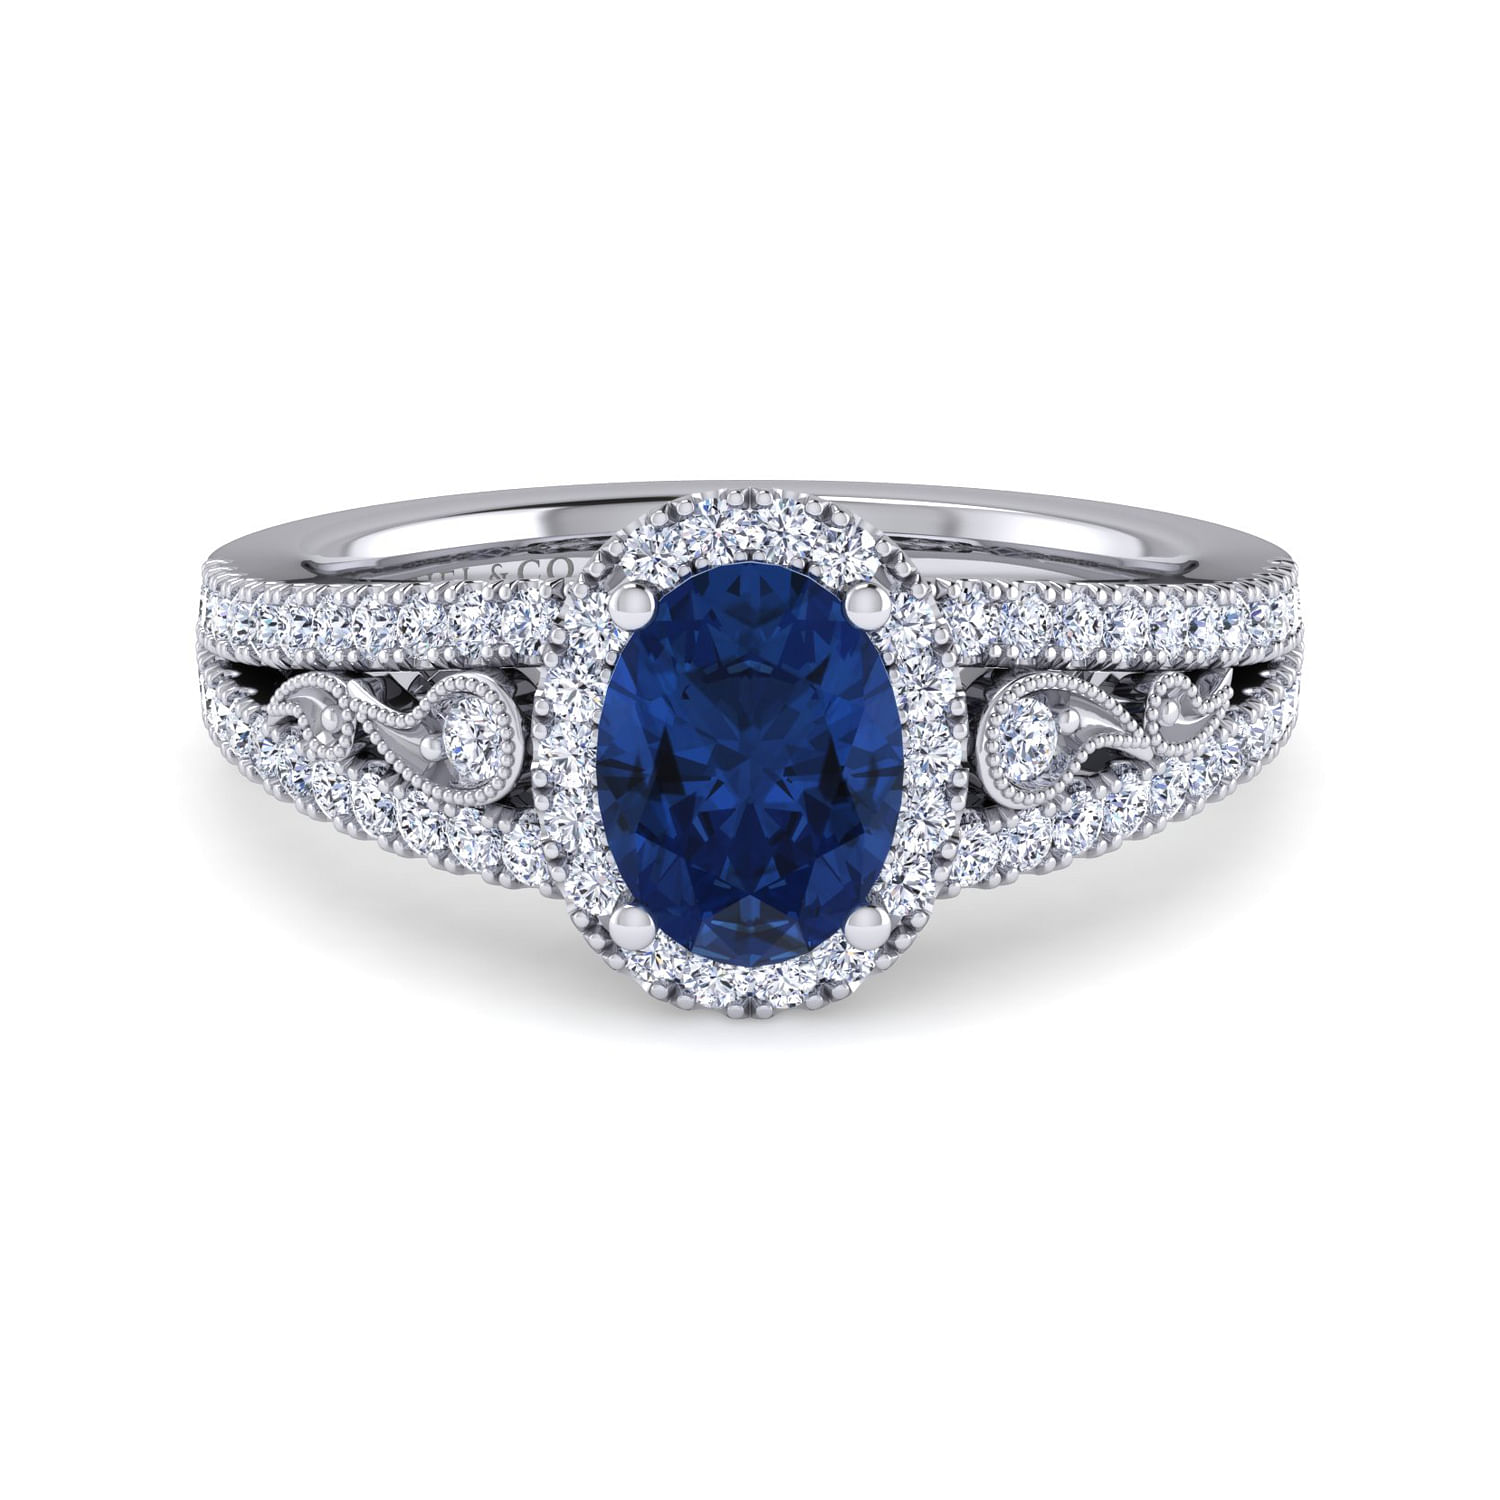 Gabriel - 14K White Gold Vintage Inspired Oval Sapphire and Diamond Halo Ring